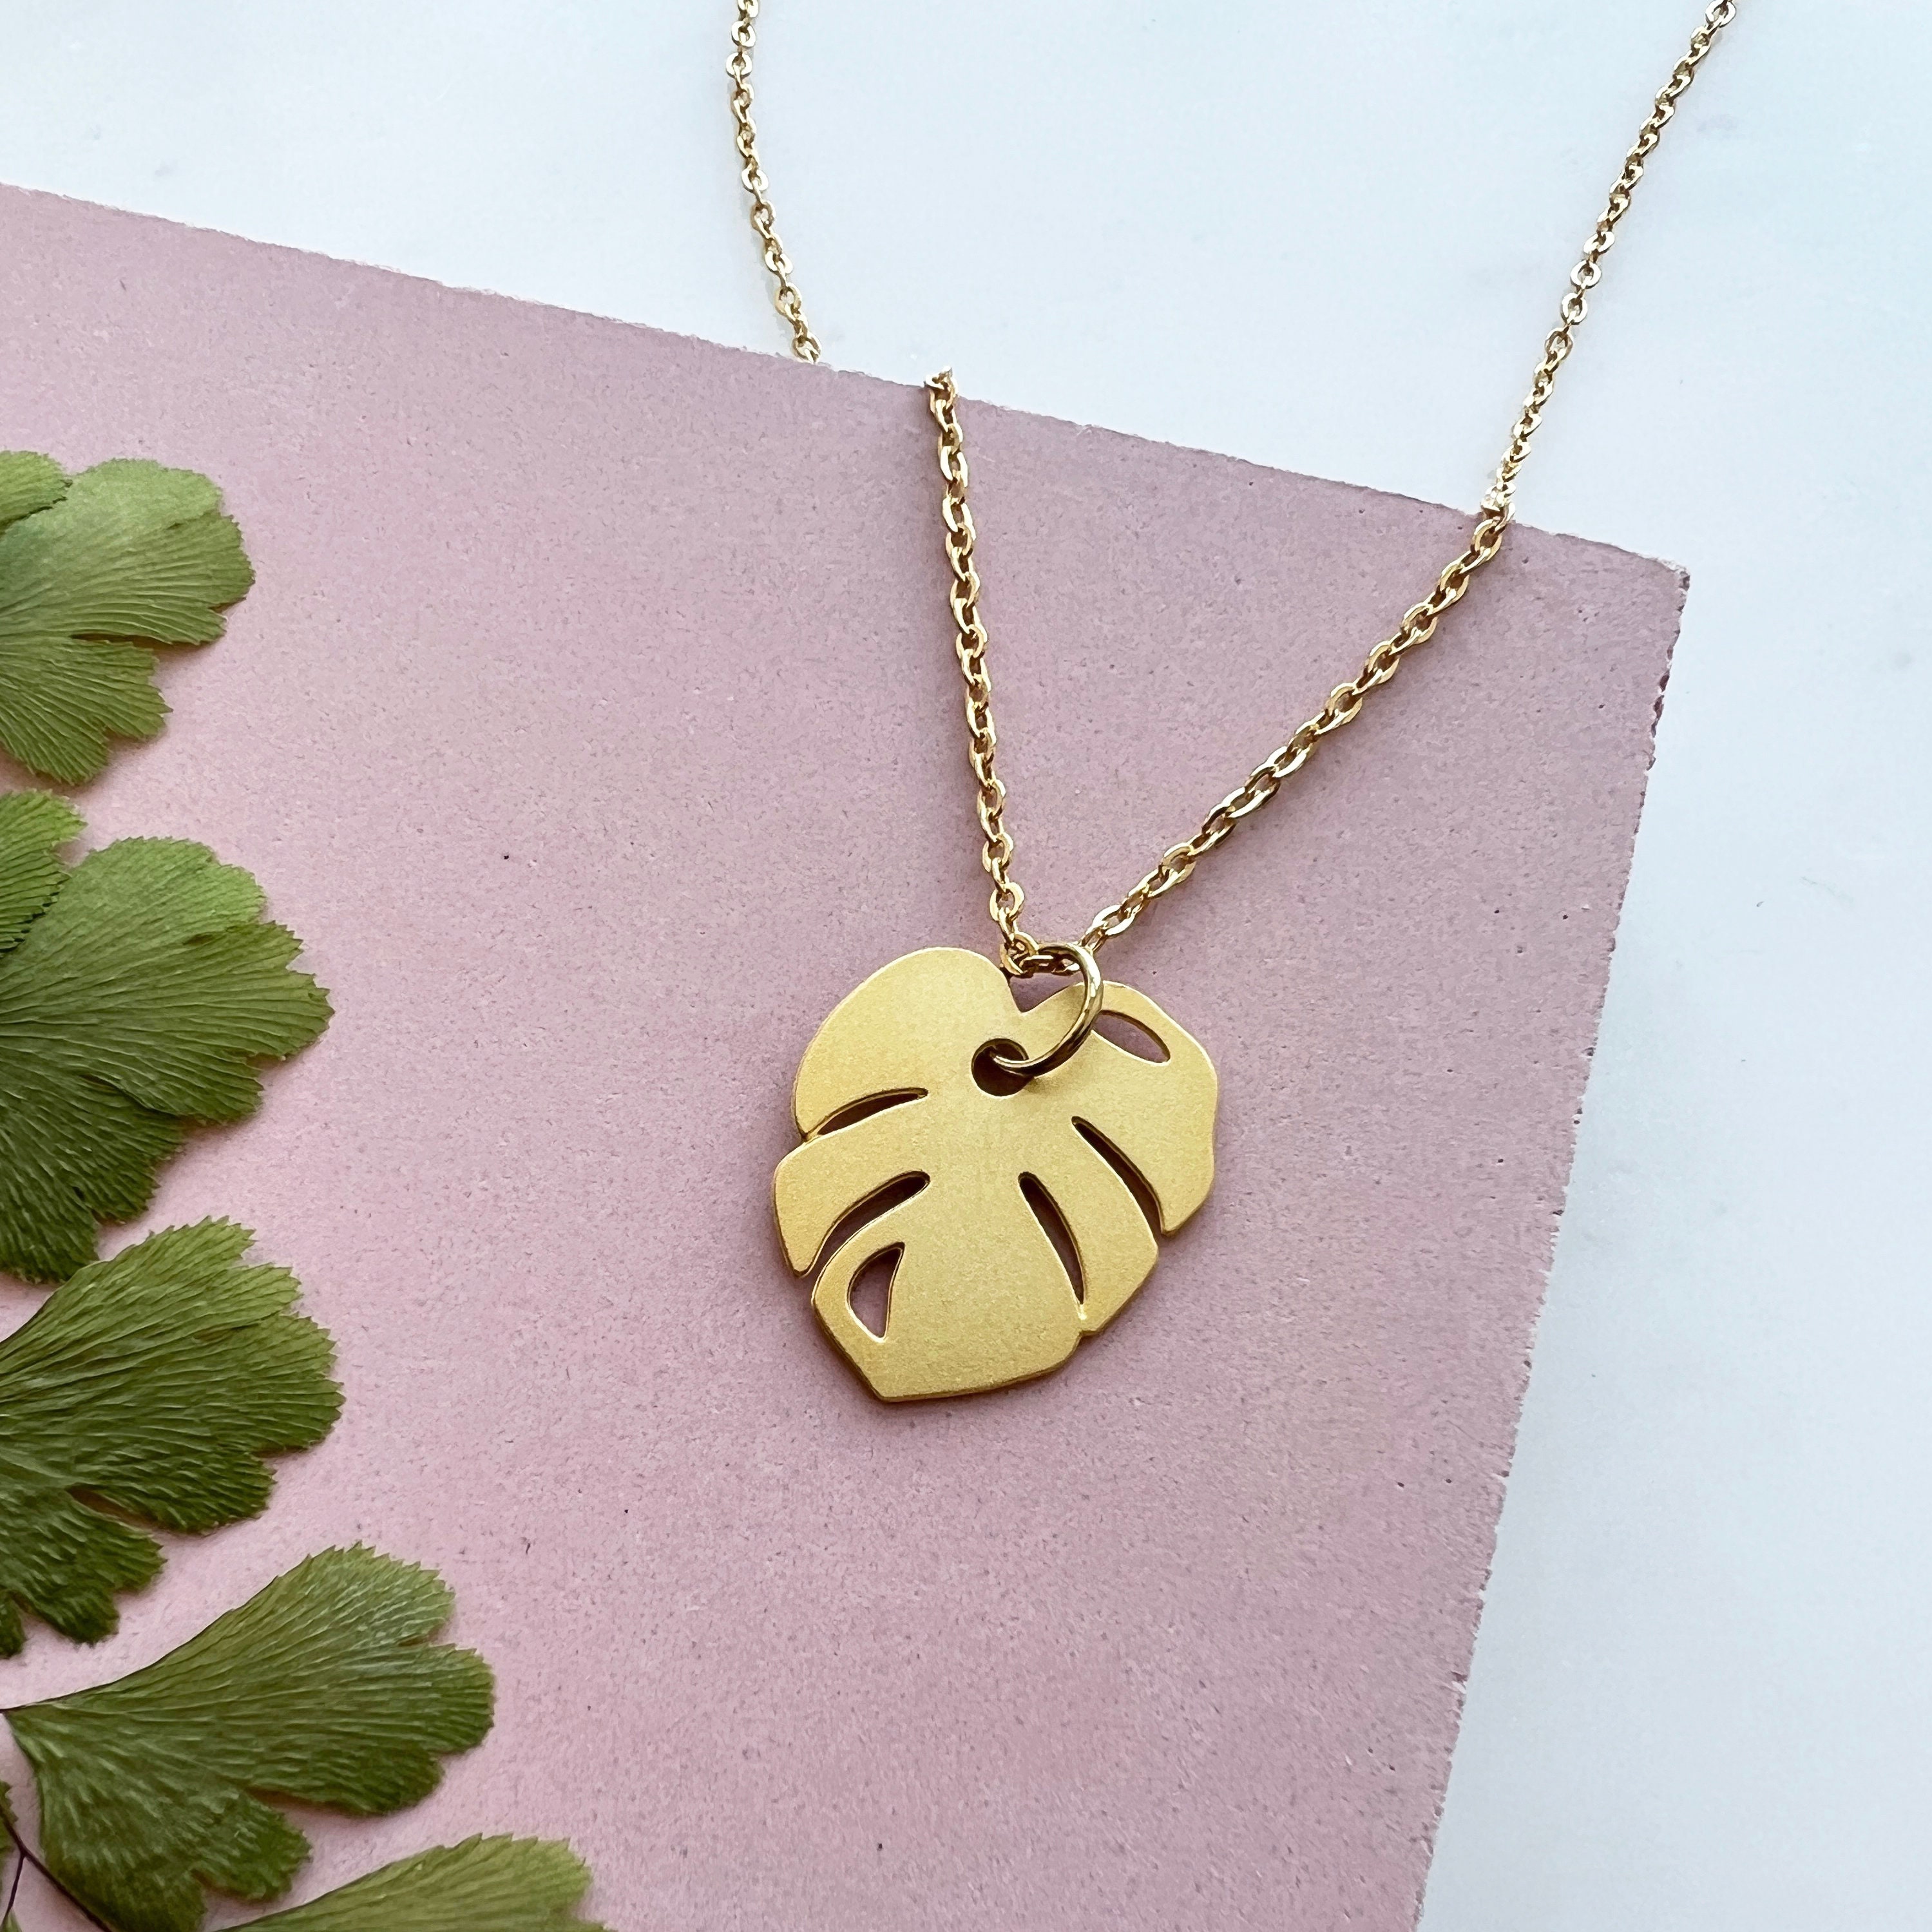 Mini Gold Monstera Necklace - Simple Leaf Pendant Gift- Tropical Cheese Plant -Gold